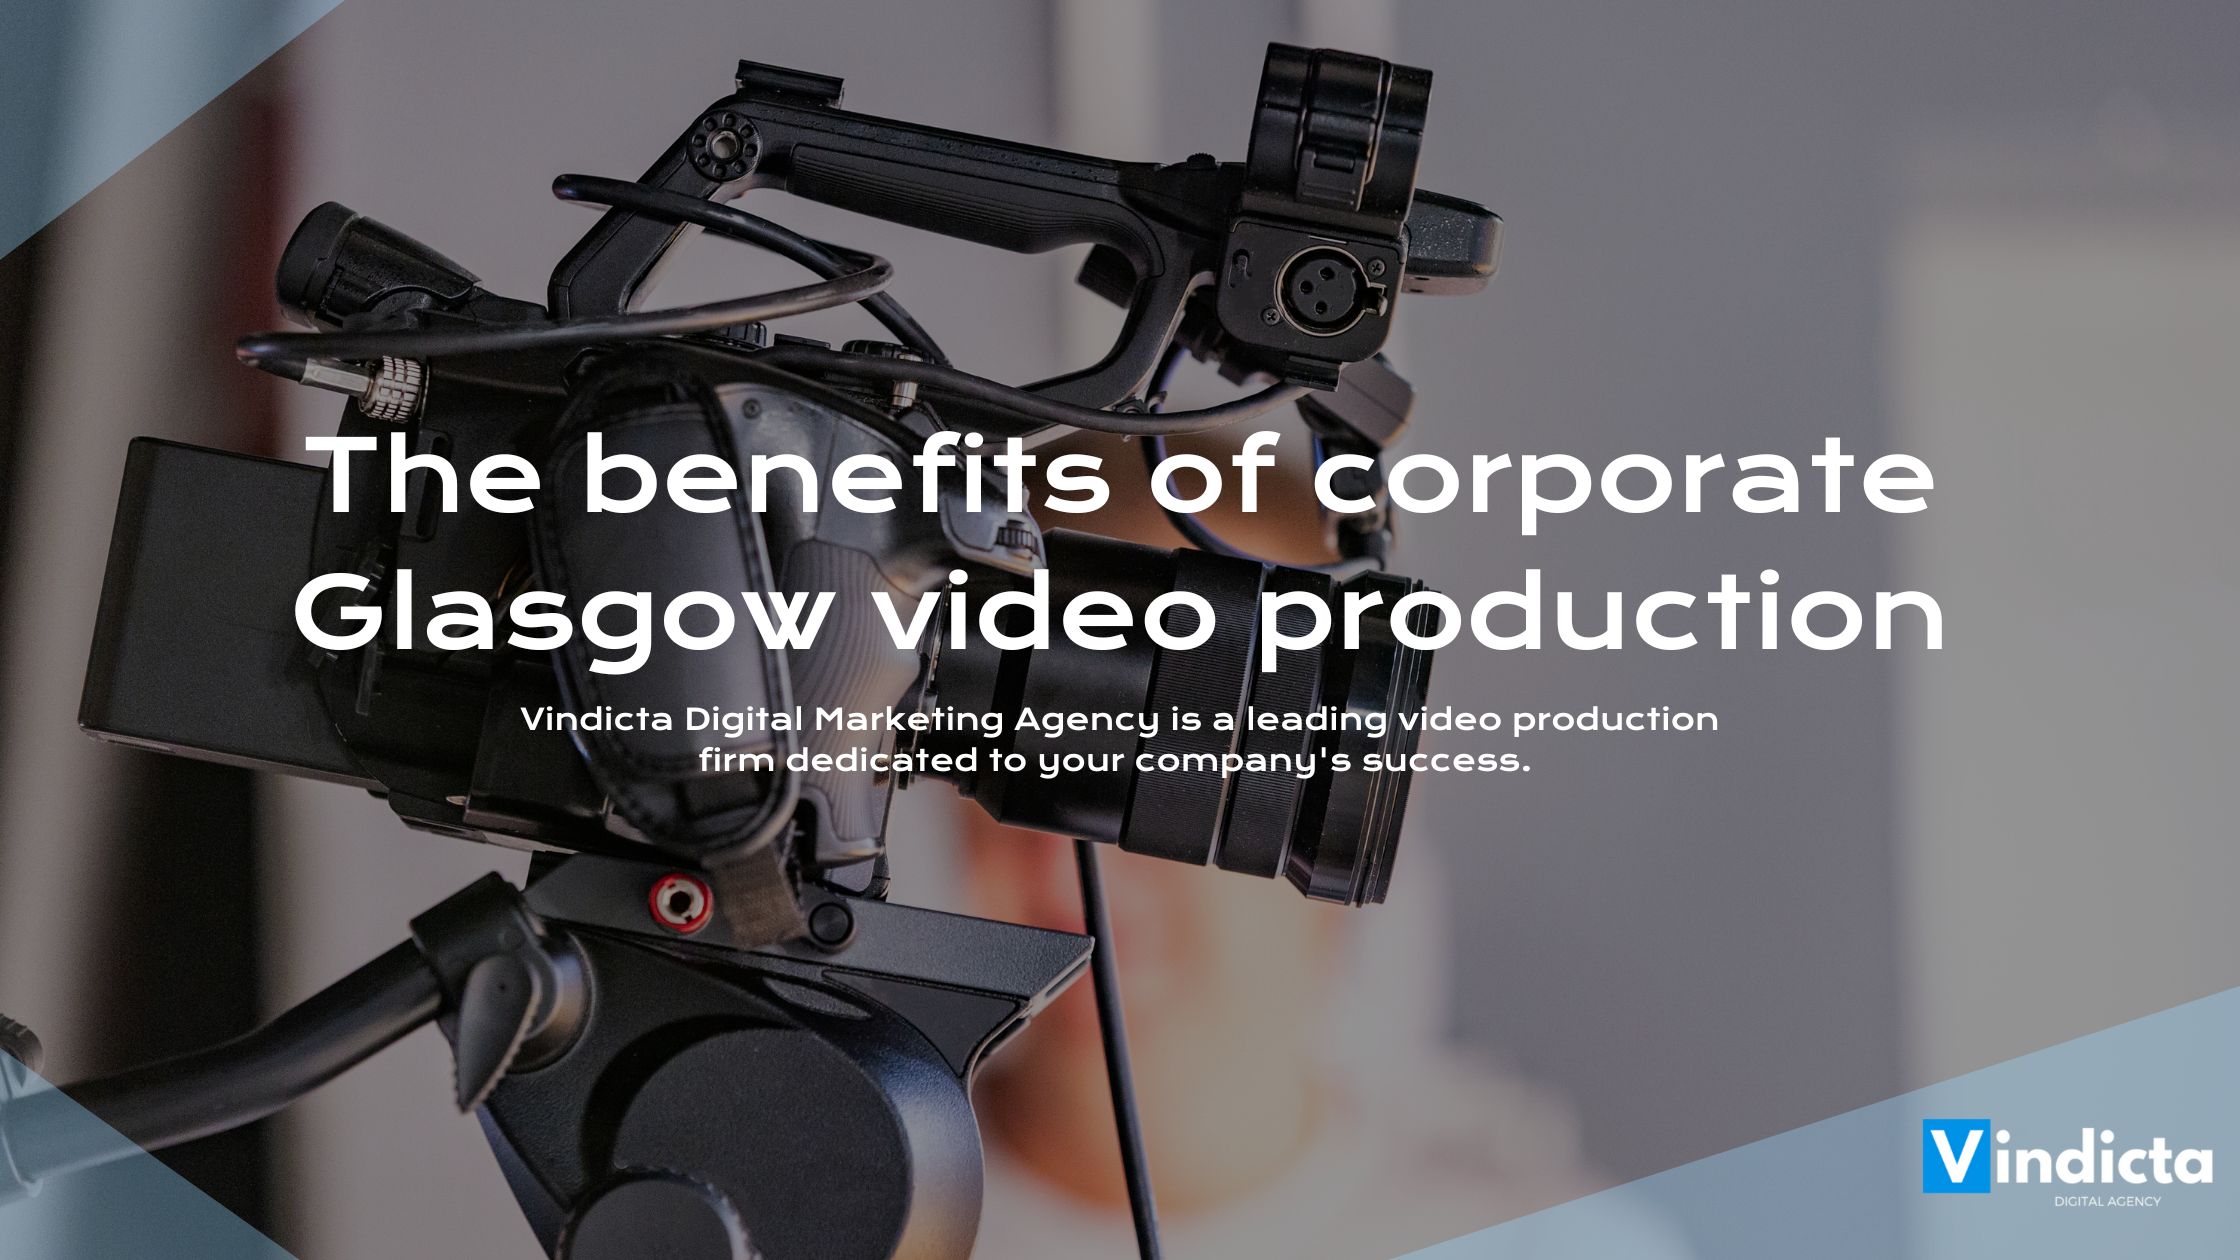 The benefits of corporate Glasgow video production